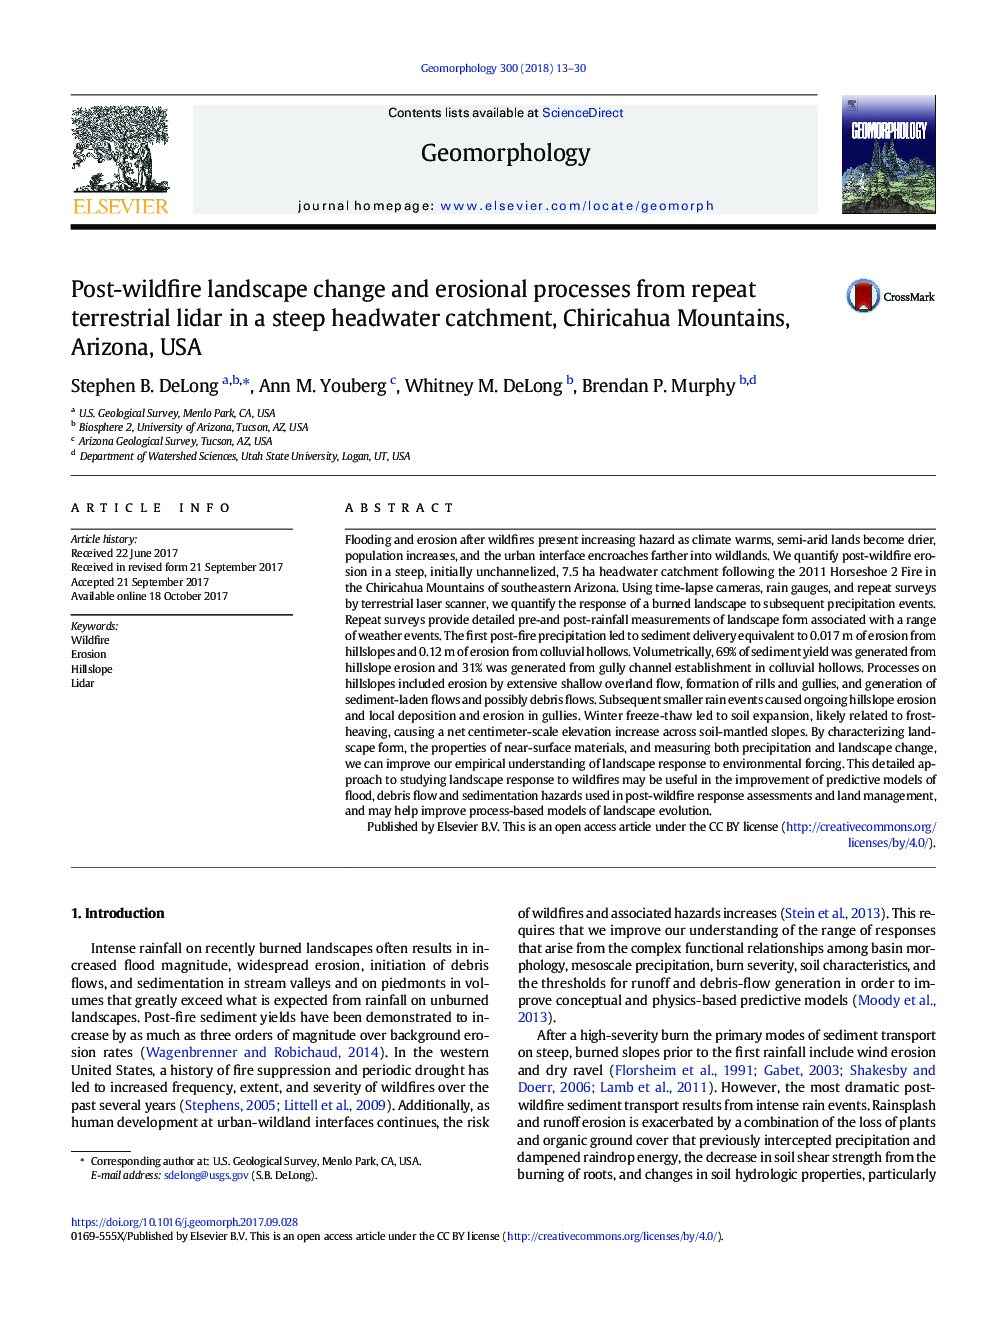 Post-wildfire landscape change and erosional processes from repeat terrestrial lidar in a steep headwater catchment, Chiricahua Mountains, Arizona, USA